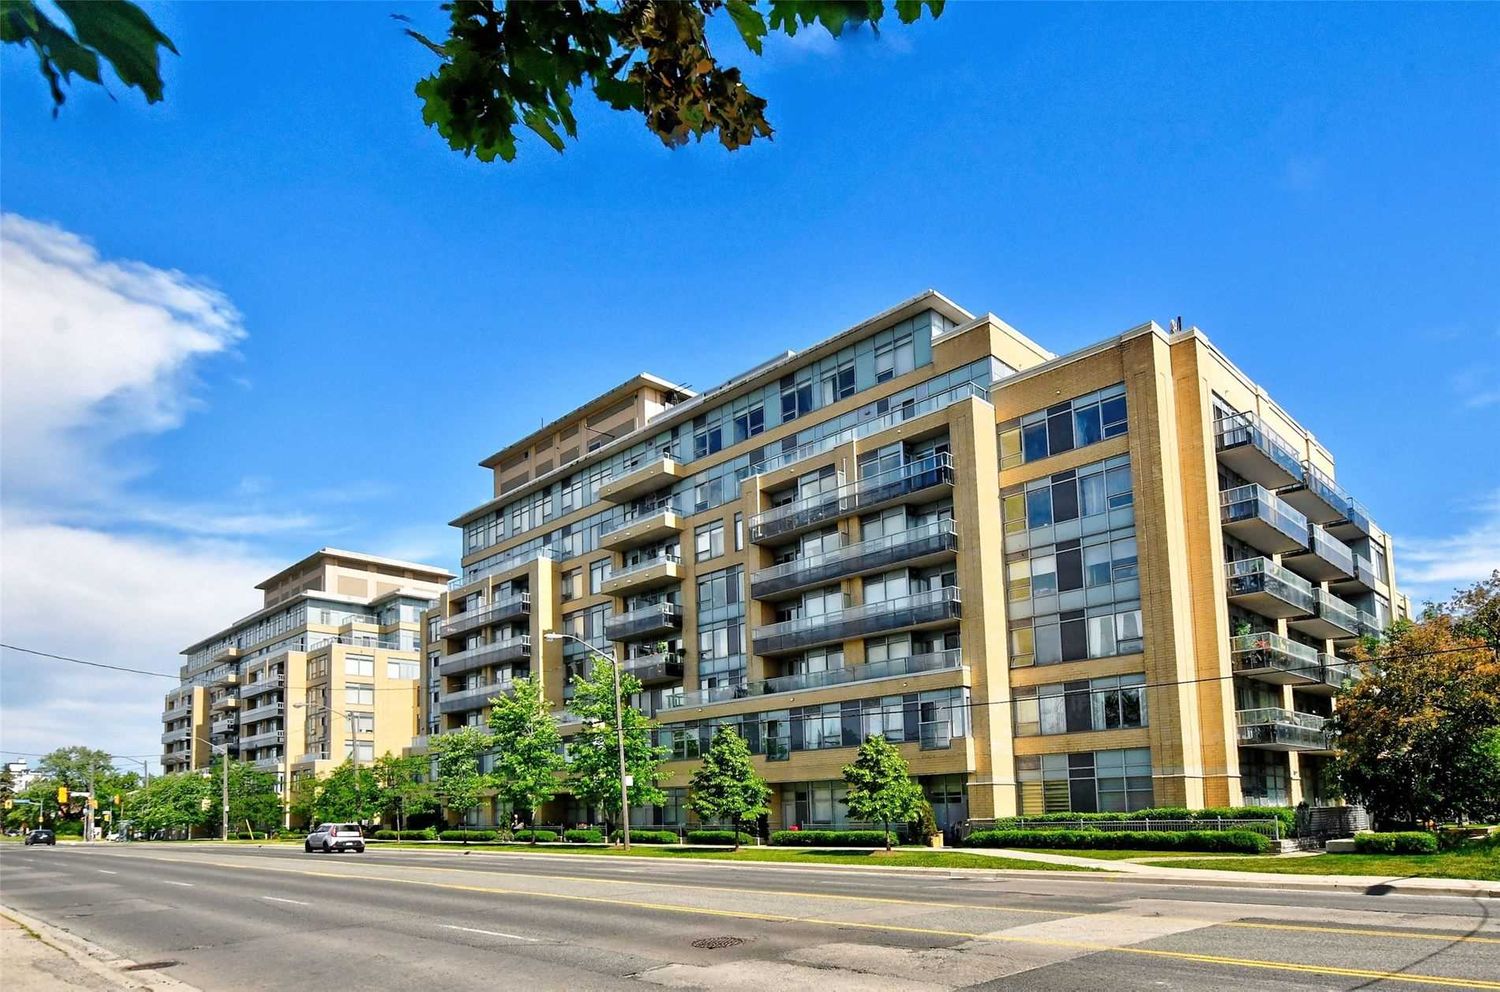 701 Sheppard Avenue W. Portrait Condos is located in  North York, Toronto - image #1 of 2